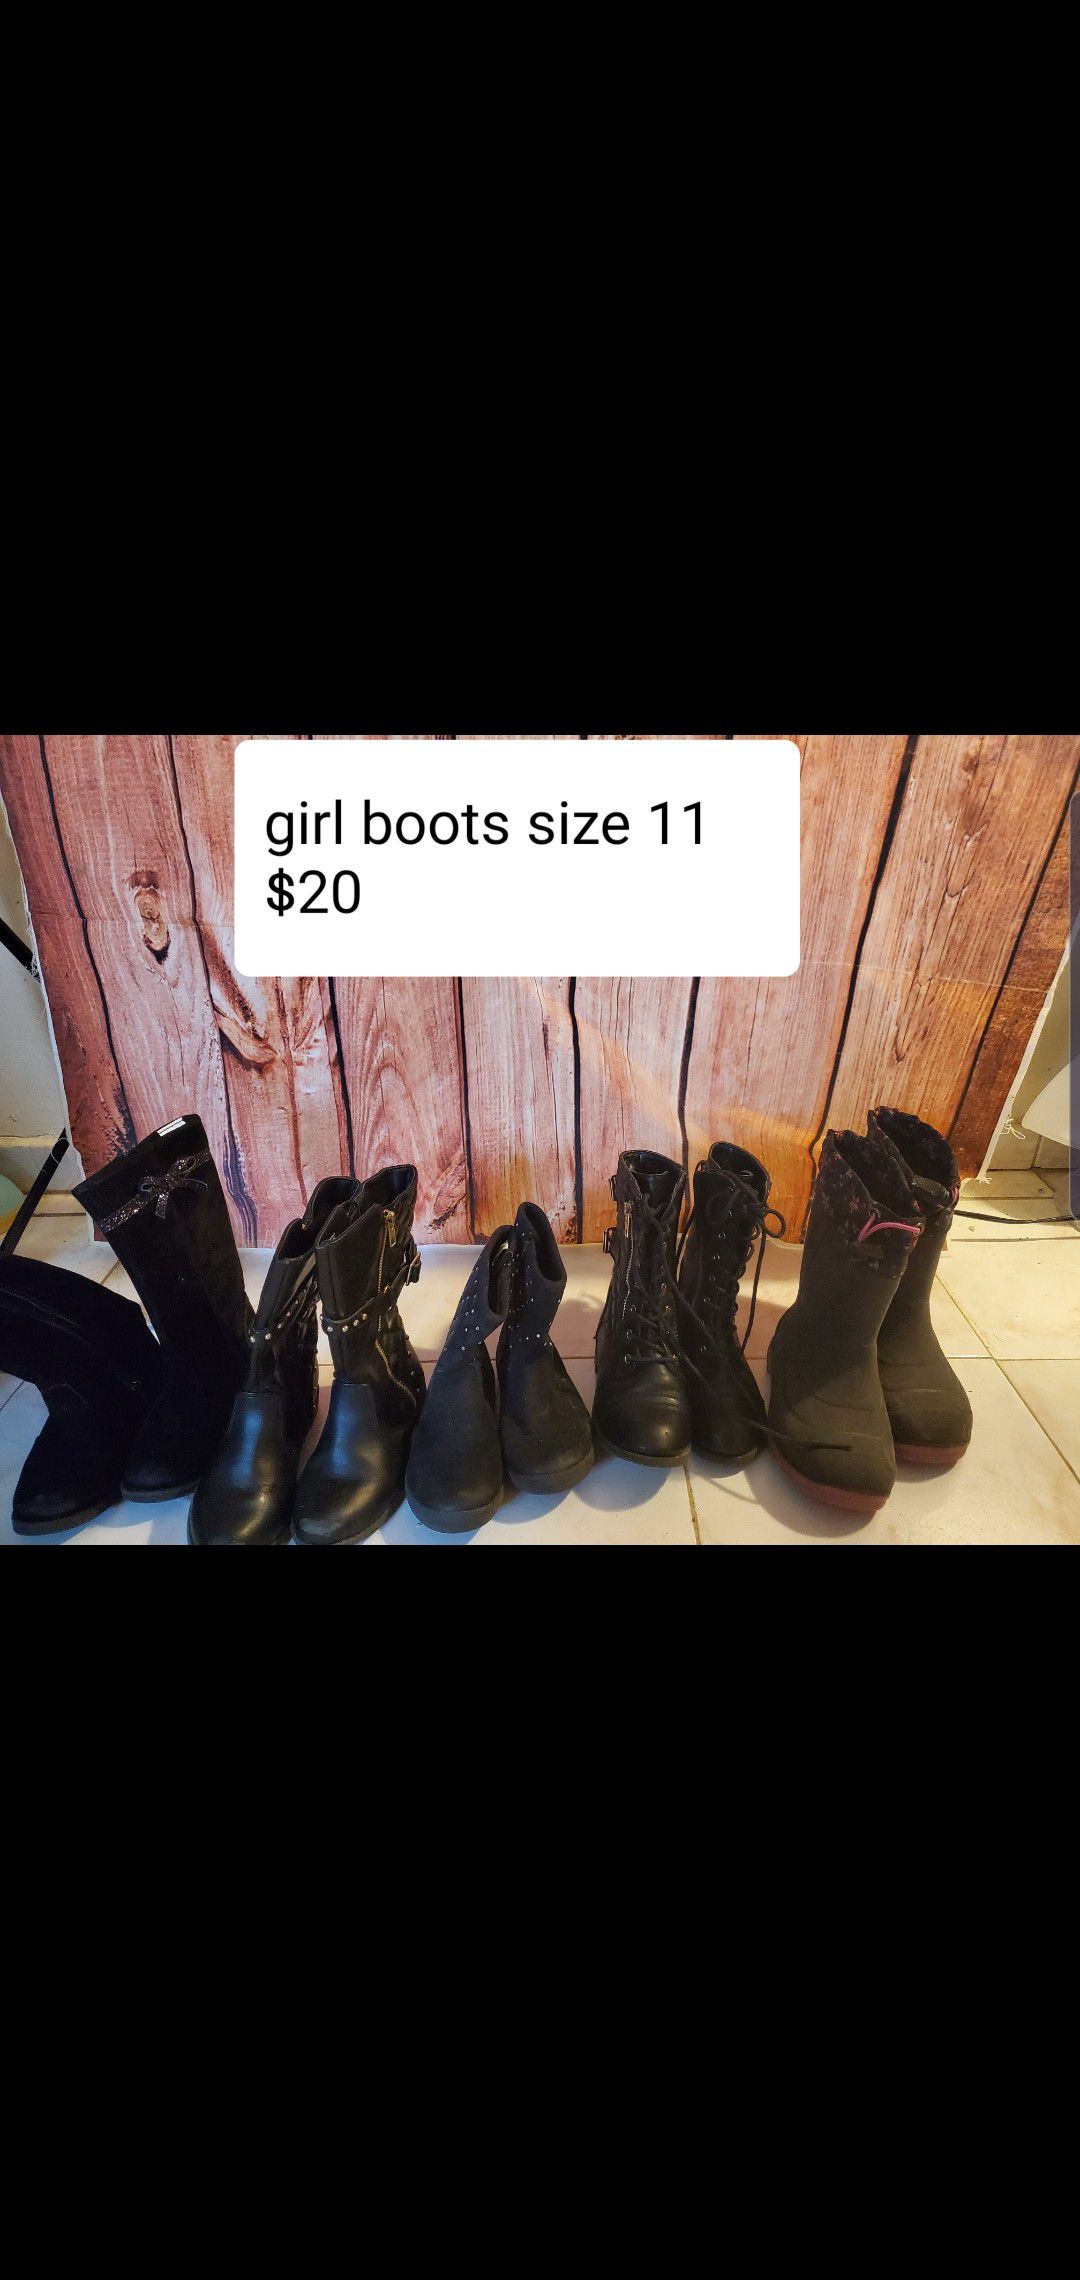 Girl boots size 11 $20 for all the boots